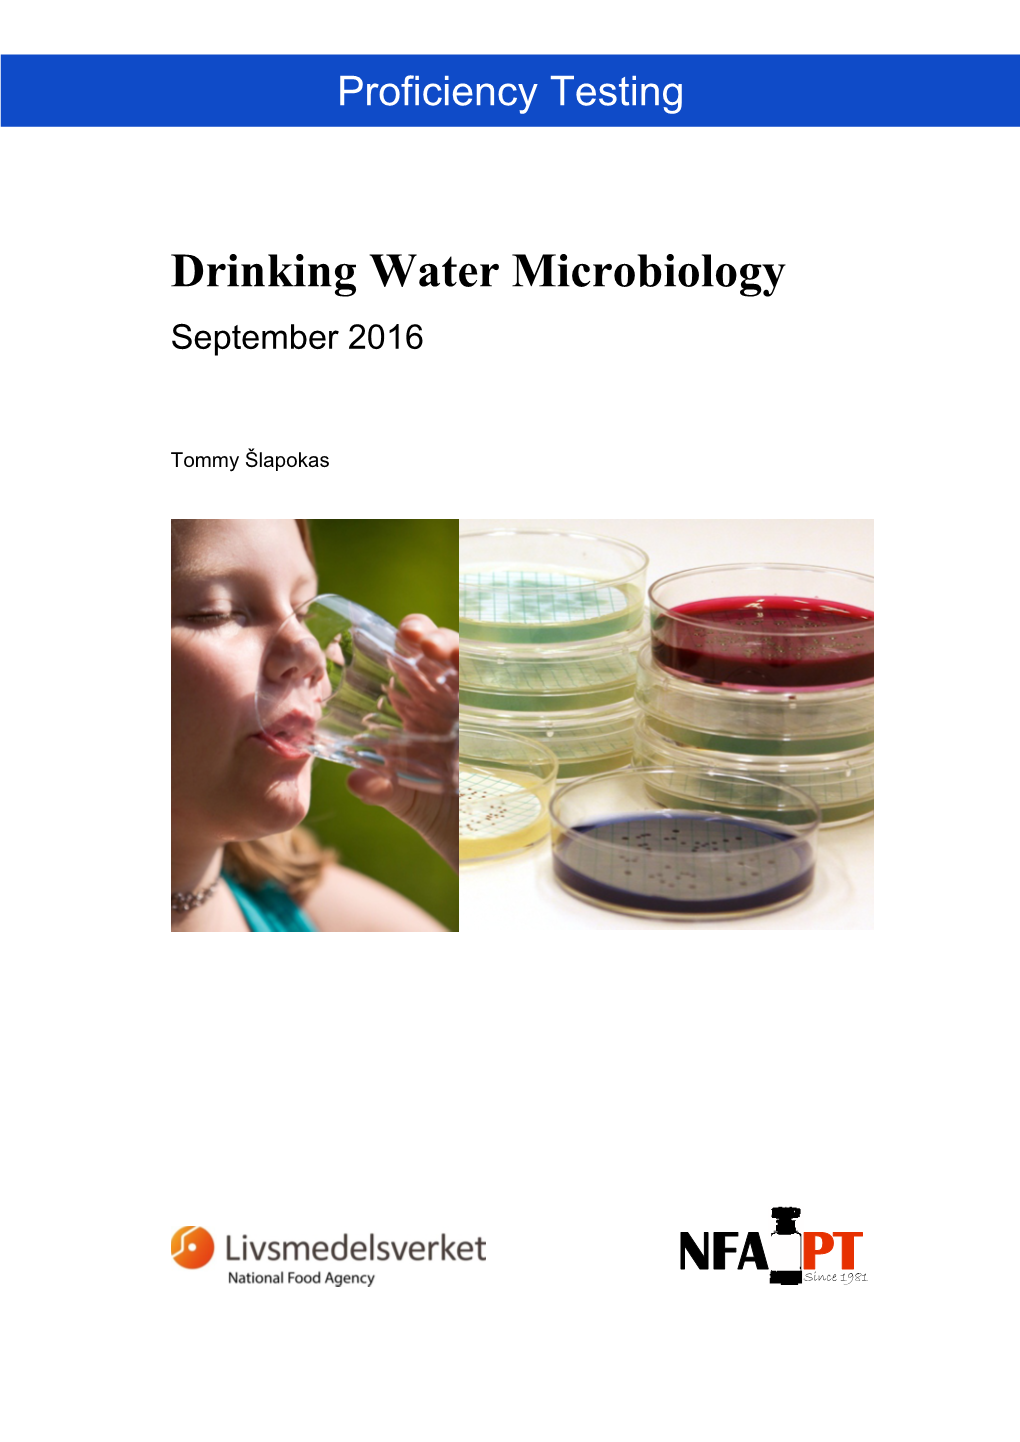 Drinking Water Microbiology September 2016